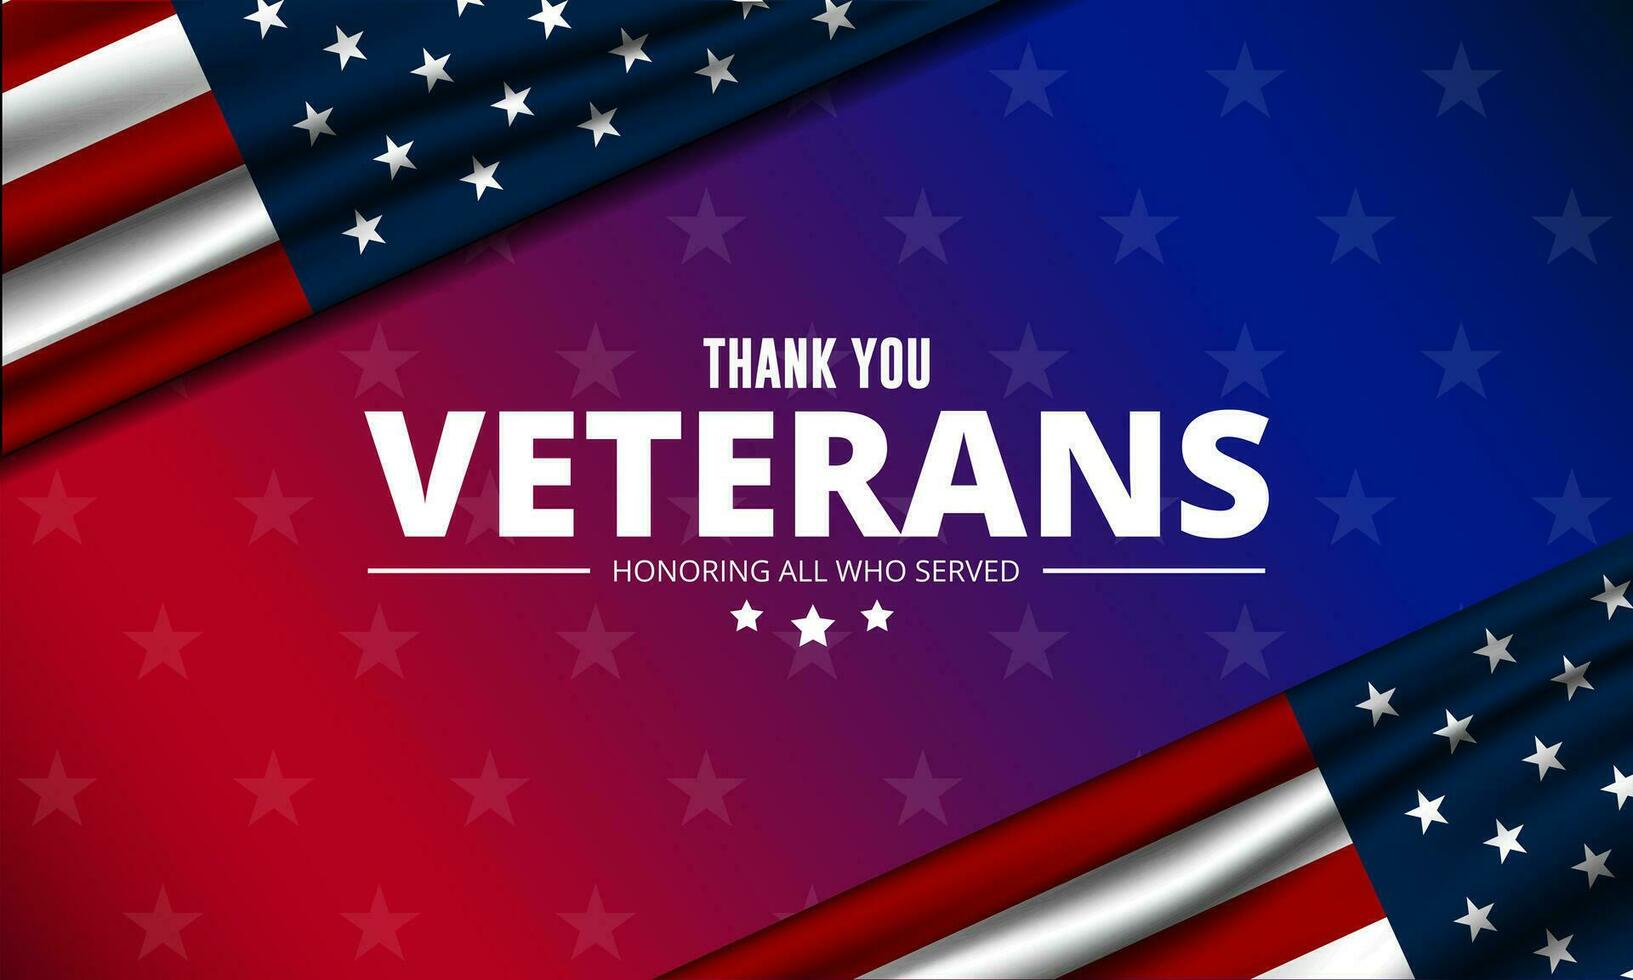 Thank you veterans, November 11, honoring all who served, American flags background vector illustration